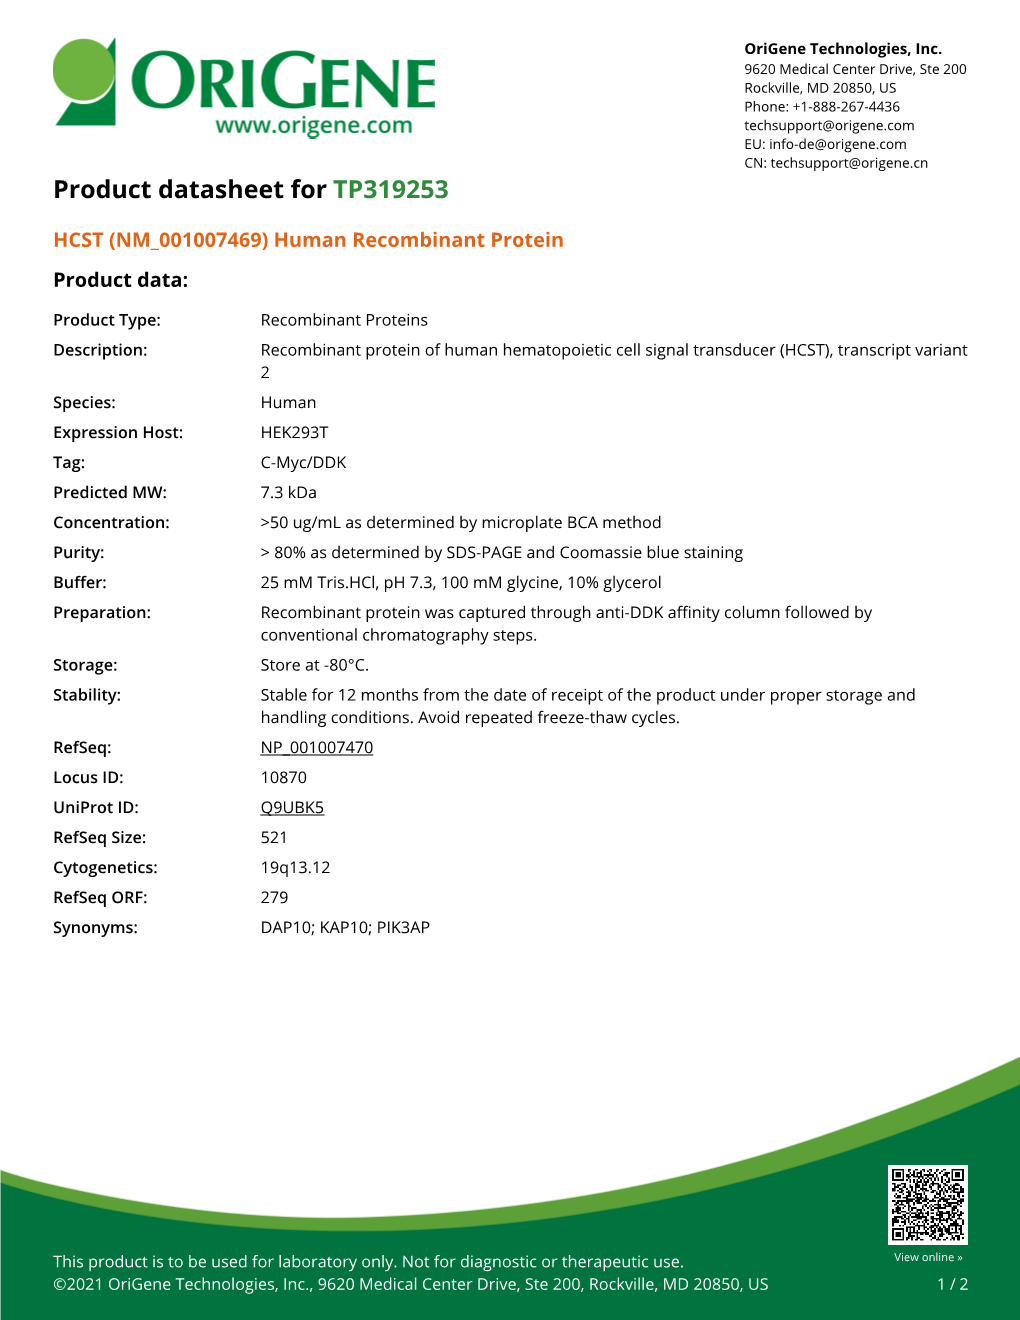 HCST (NM 001007469) Human Recombinant Protein Product Data